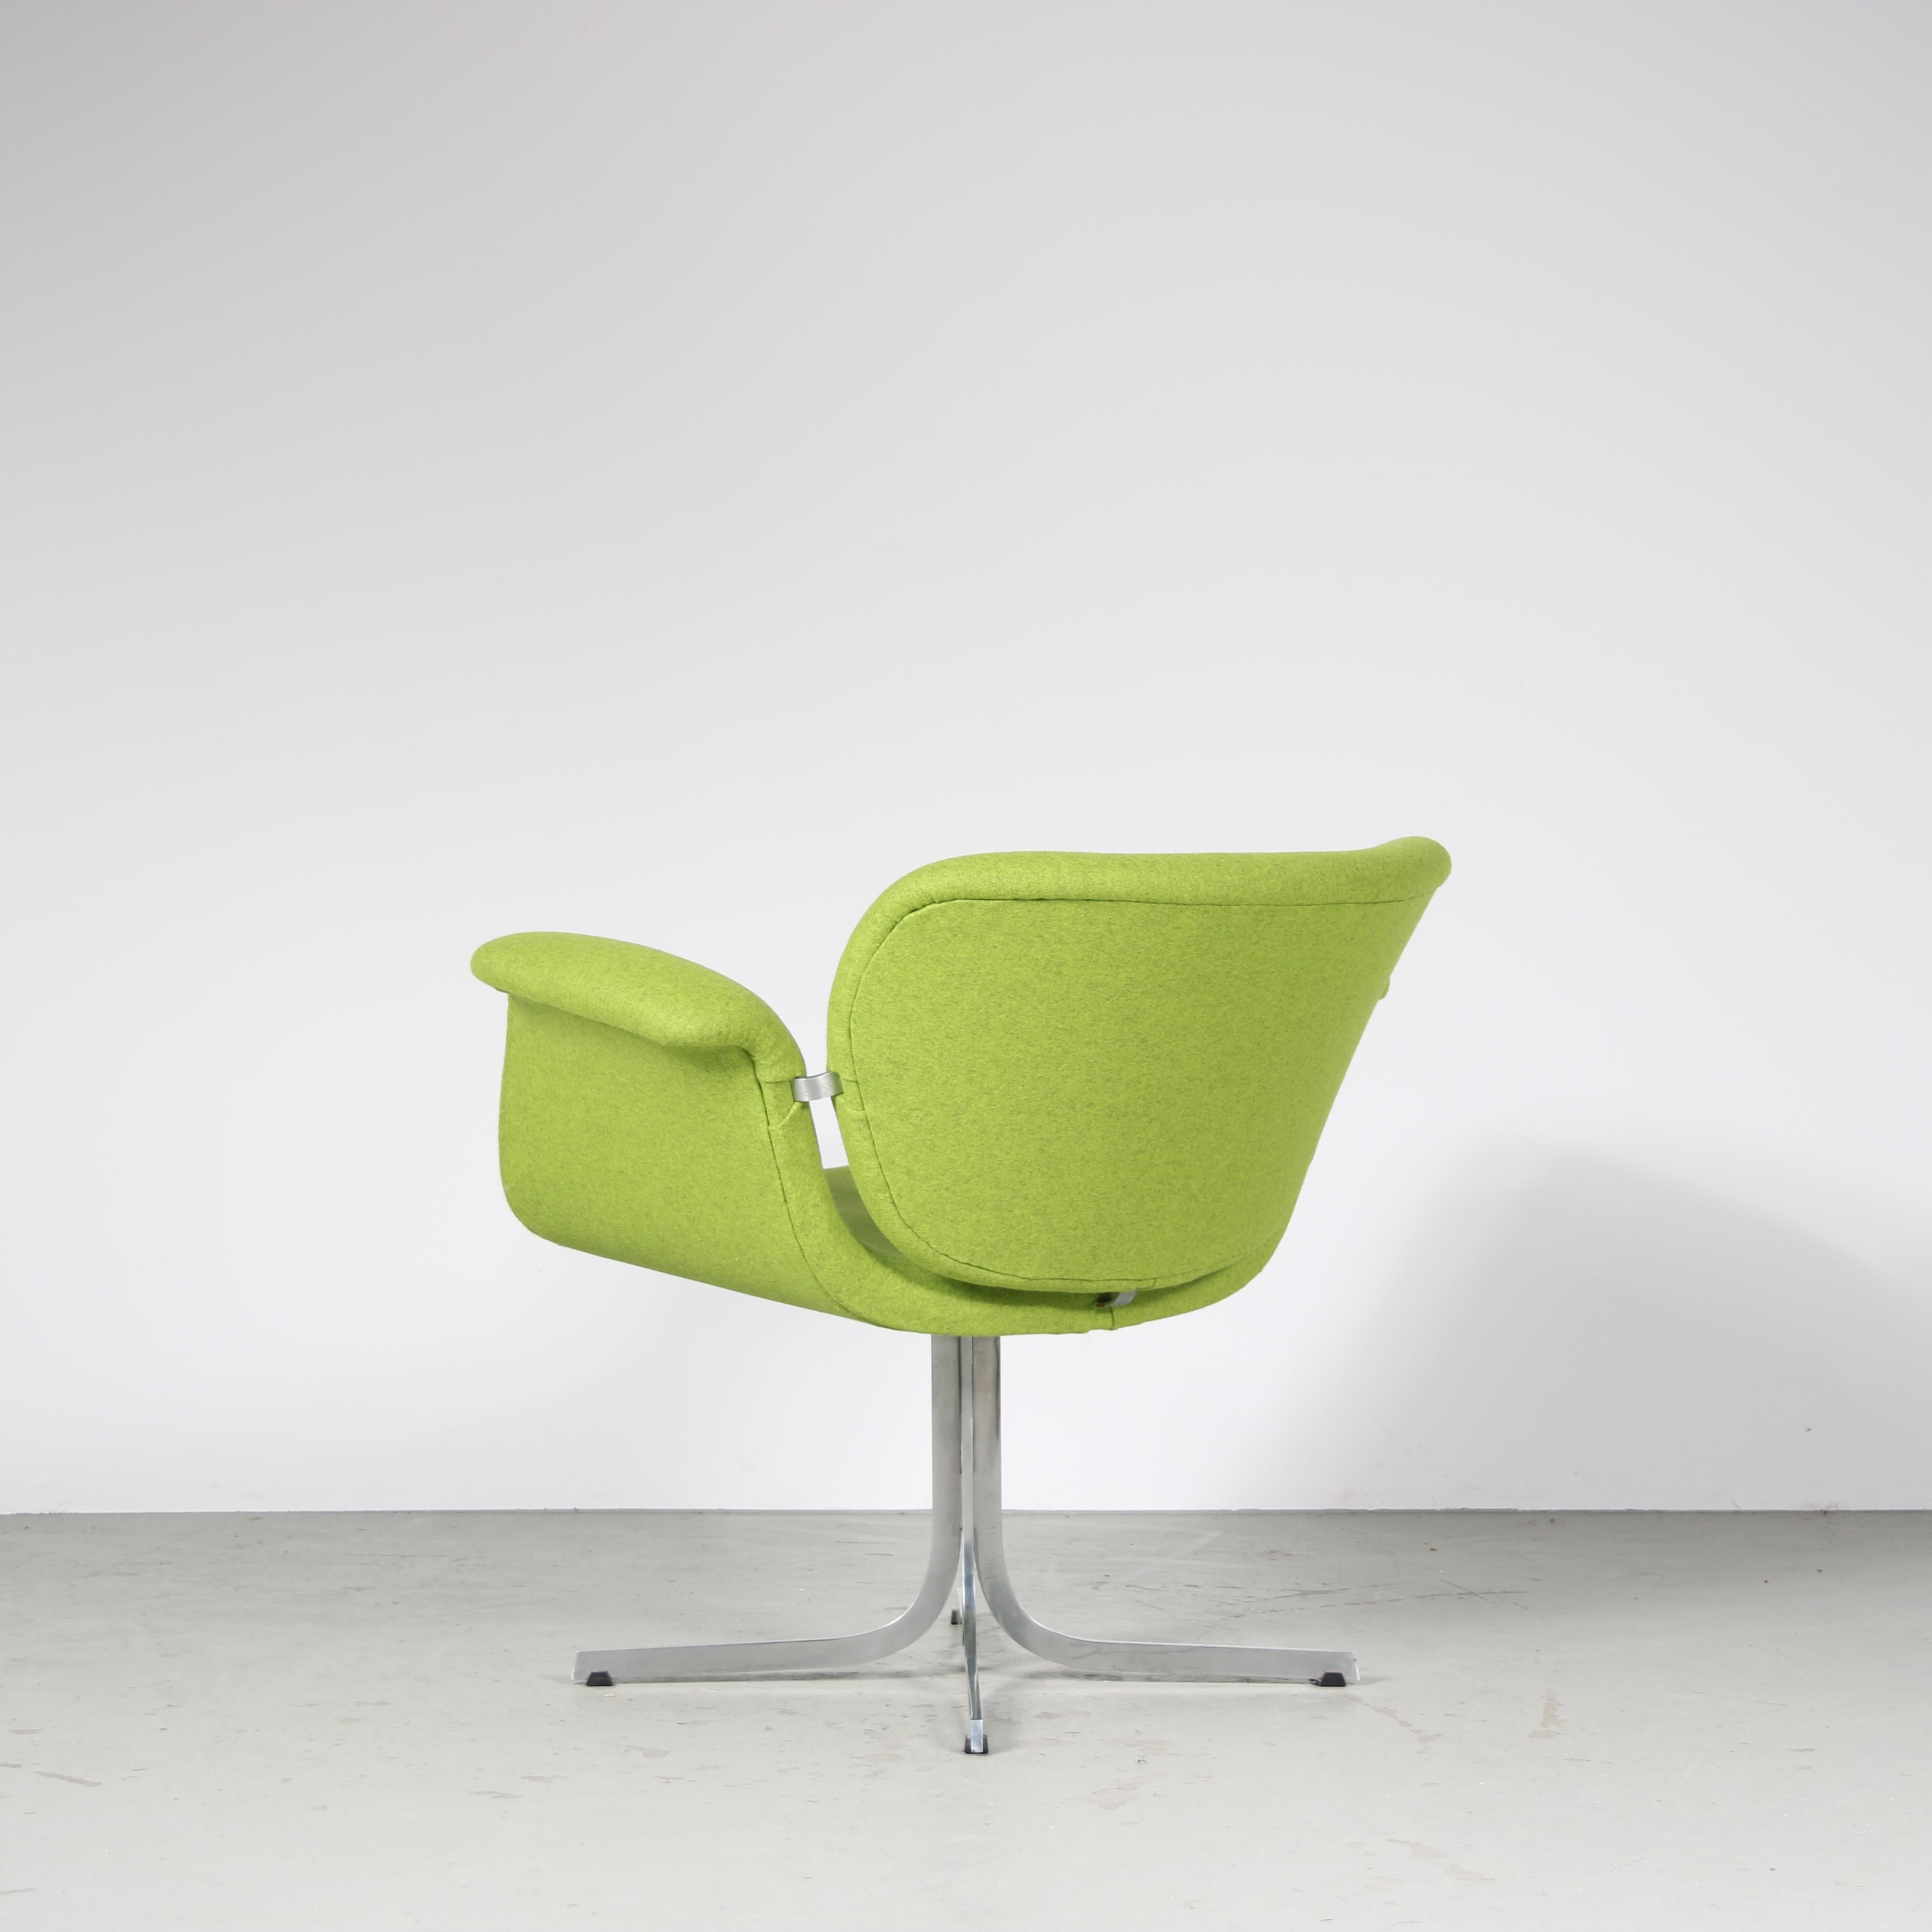 Mid-20th Century Pierre Paulin “Big Tulip” Chair for Artifort, Netherlands 1960 For Sale